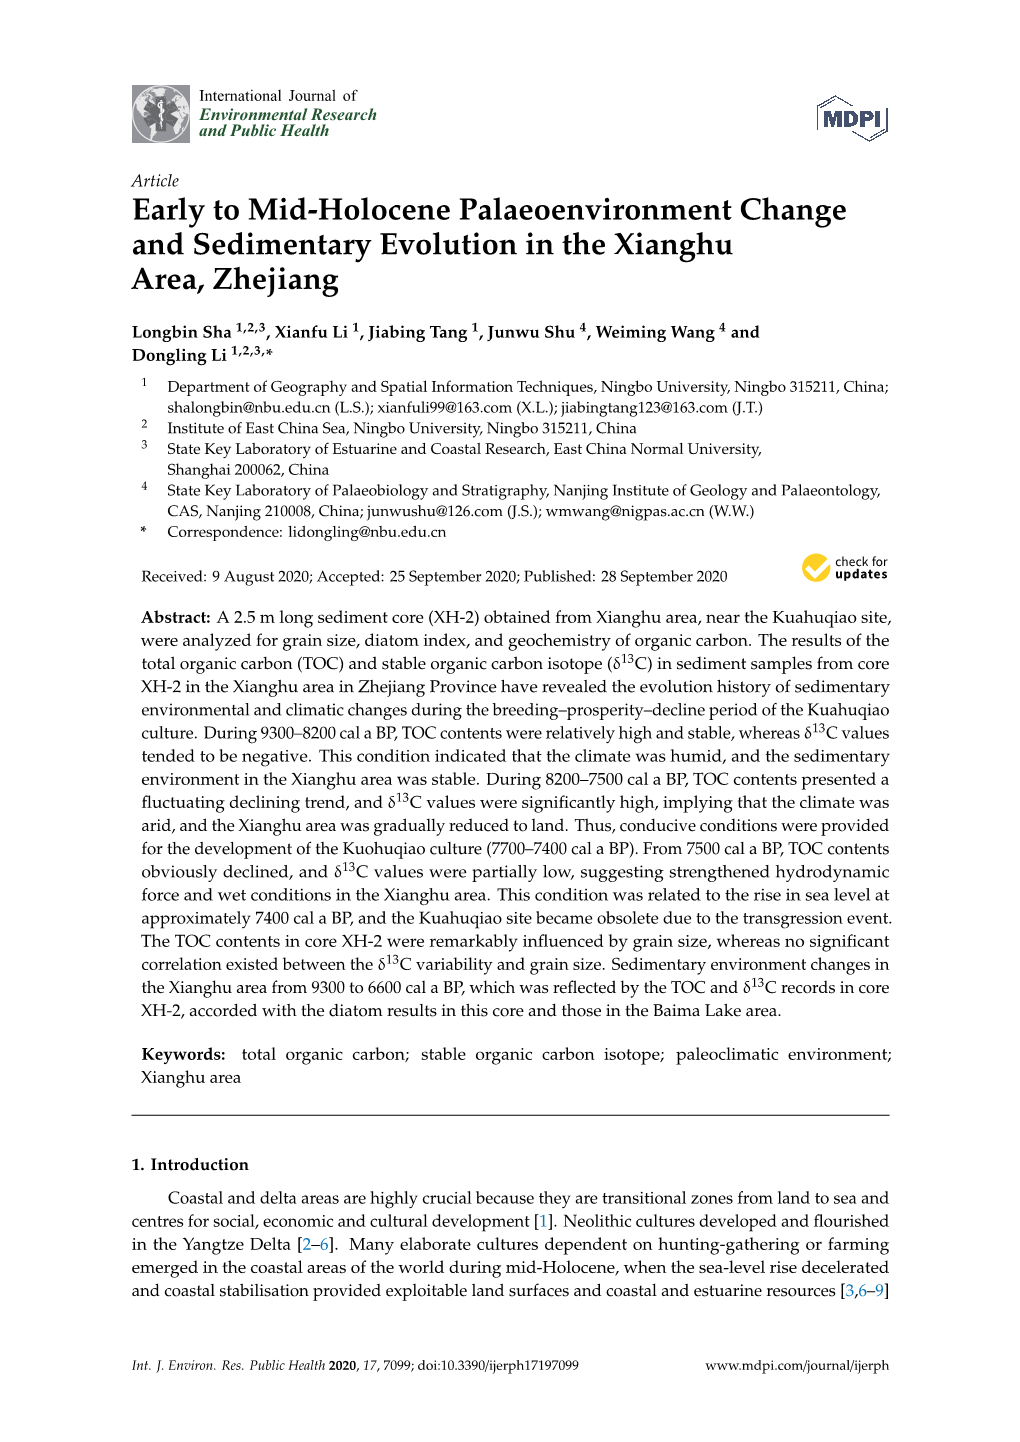 Early to Mid-Holocene Palaeoenvironment Change and Sedimentary Evolution in the Xianghu Area, Zhejiang